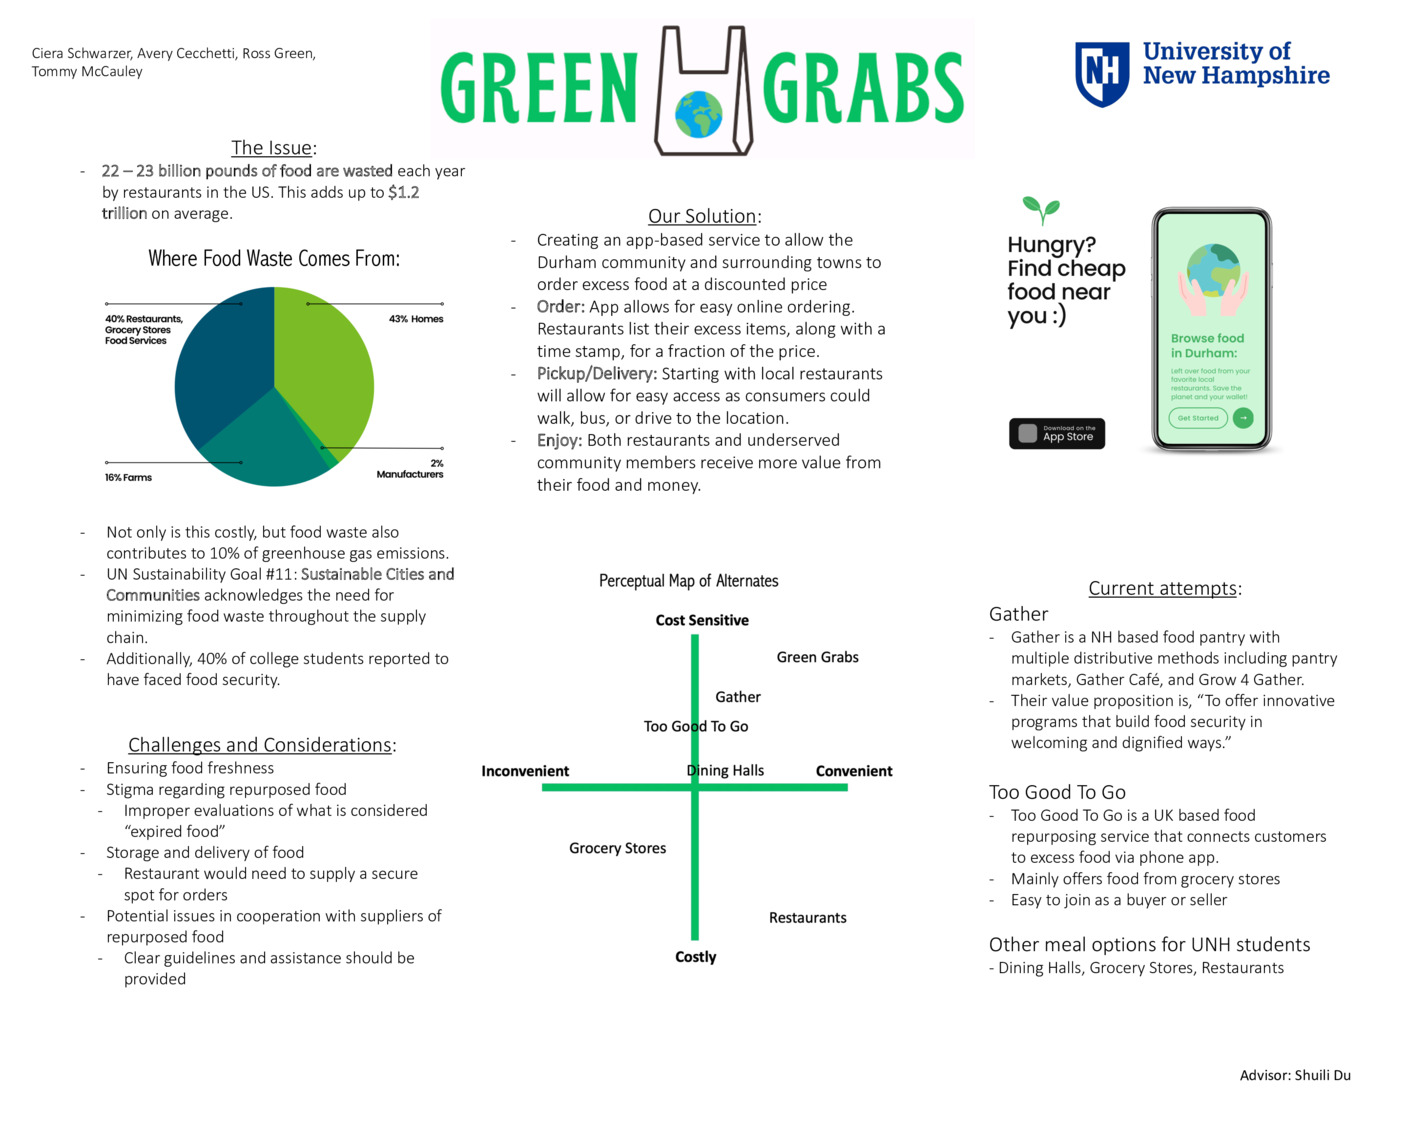 Green Grabs Urc Poster by chs1032